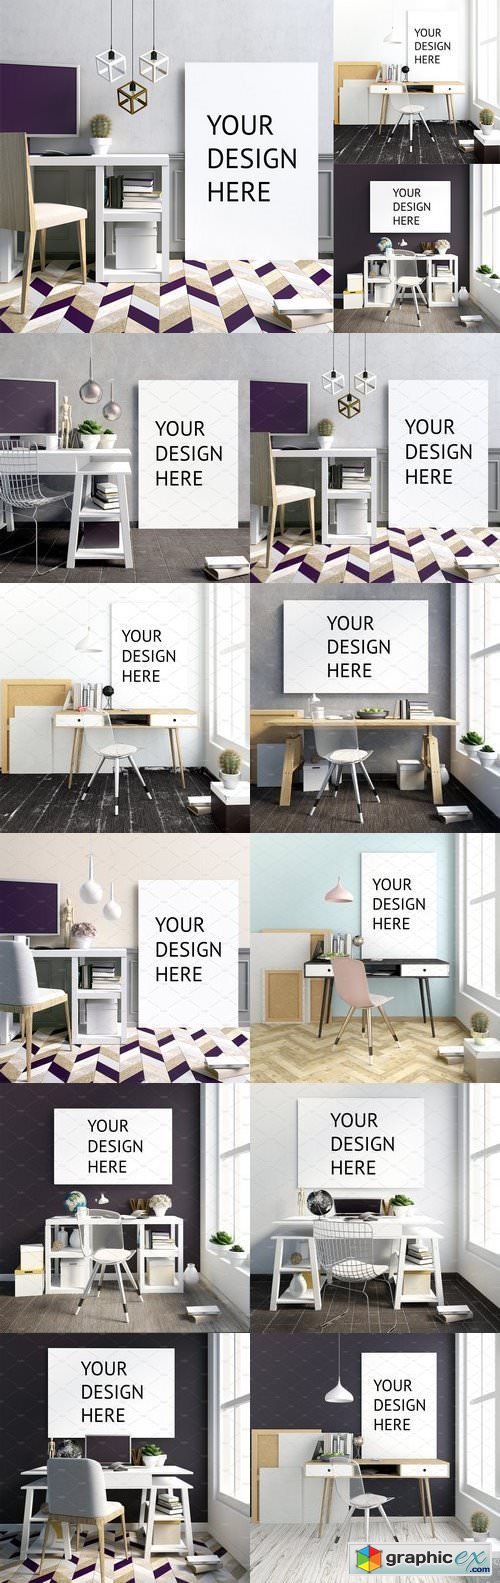 10 workplace poster mock up